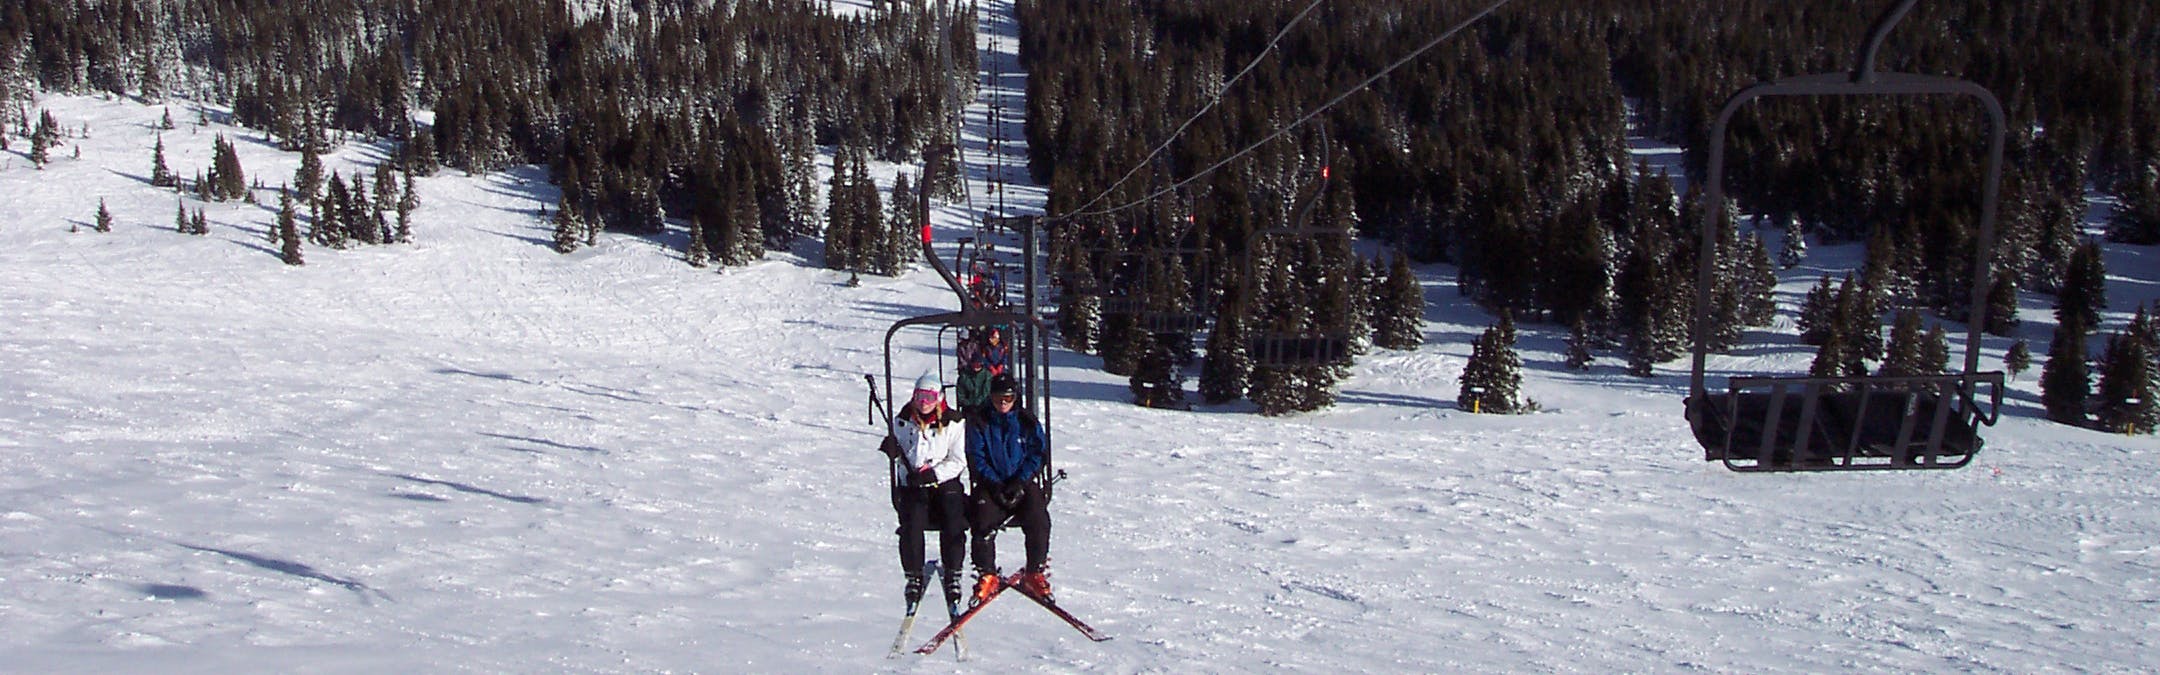 Several skiers sitting on a chairlift at a ski resort. 